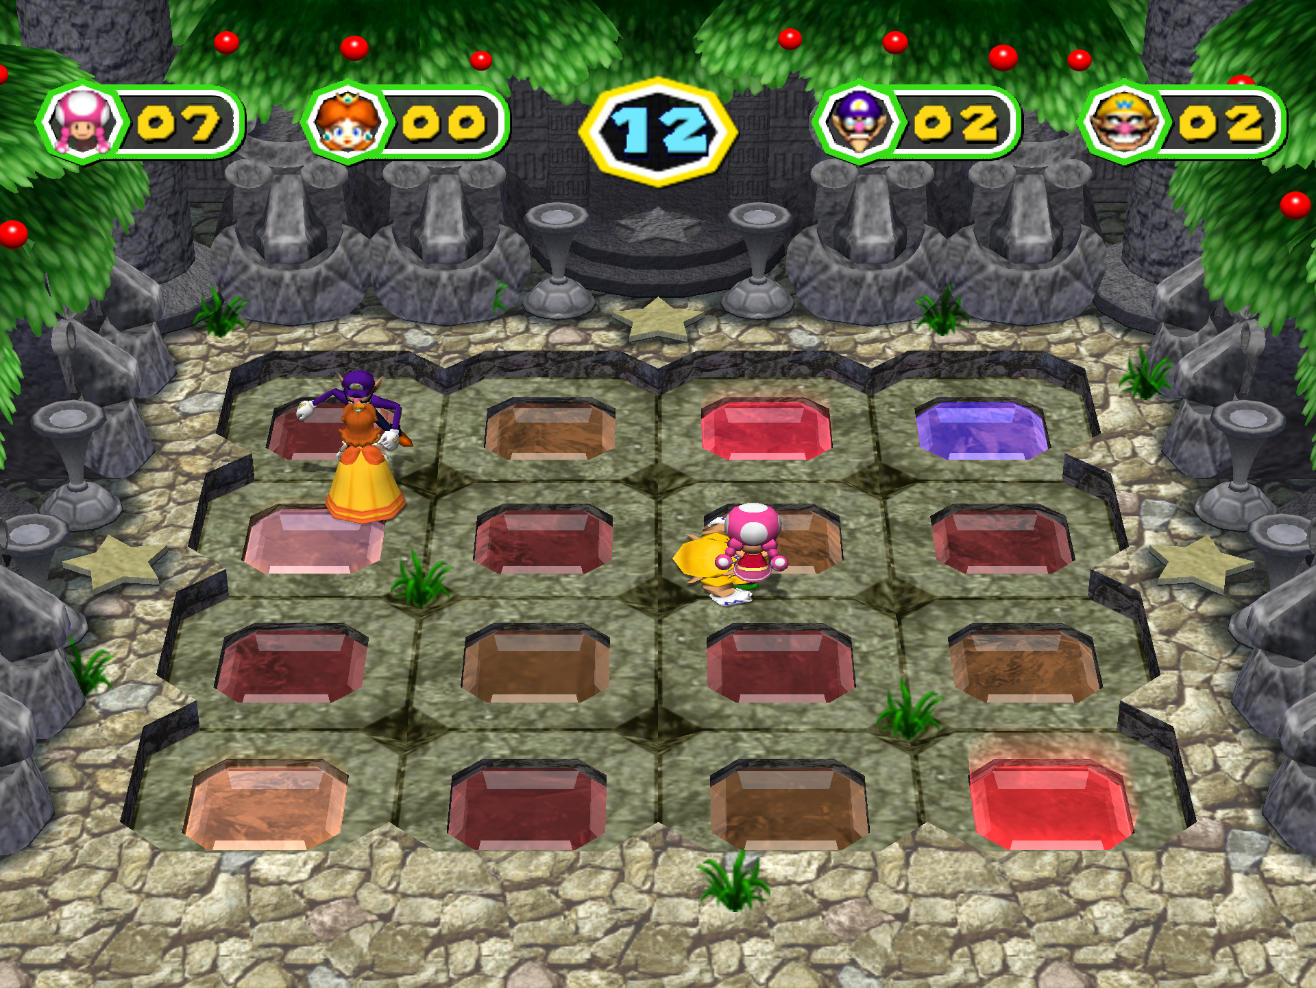 My picks for the remaining mini-games in Mario Party the Top 100 Smashdance